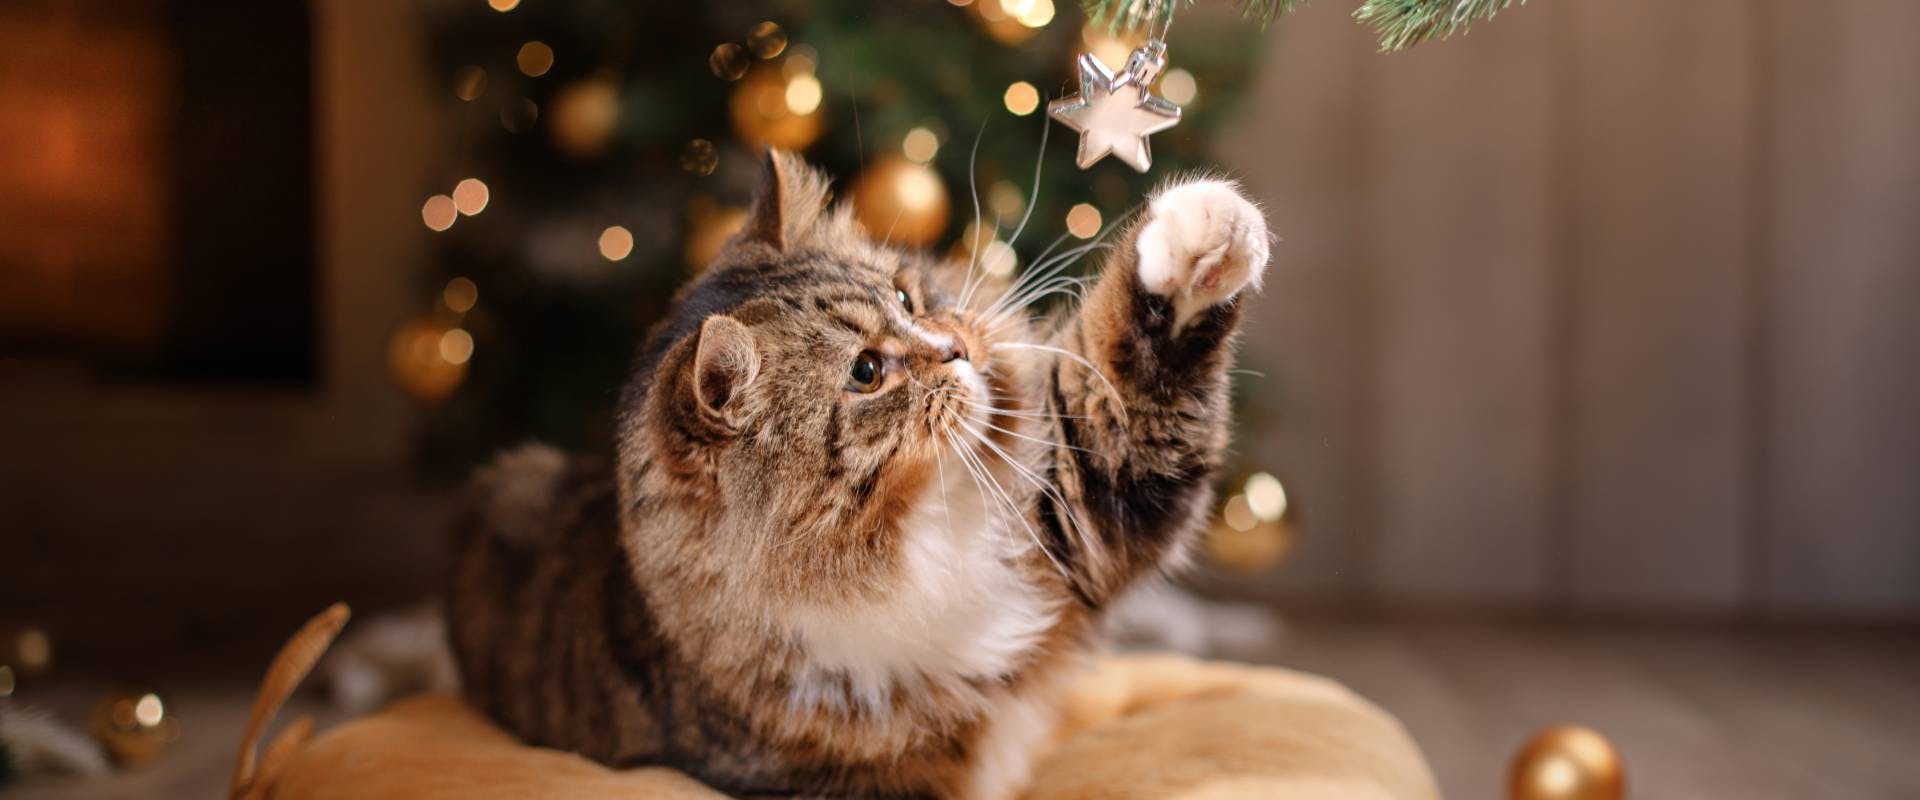 long haired tabby cat pawing at a Christmas tree ornament dangling from a branch